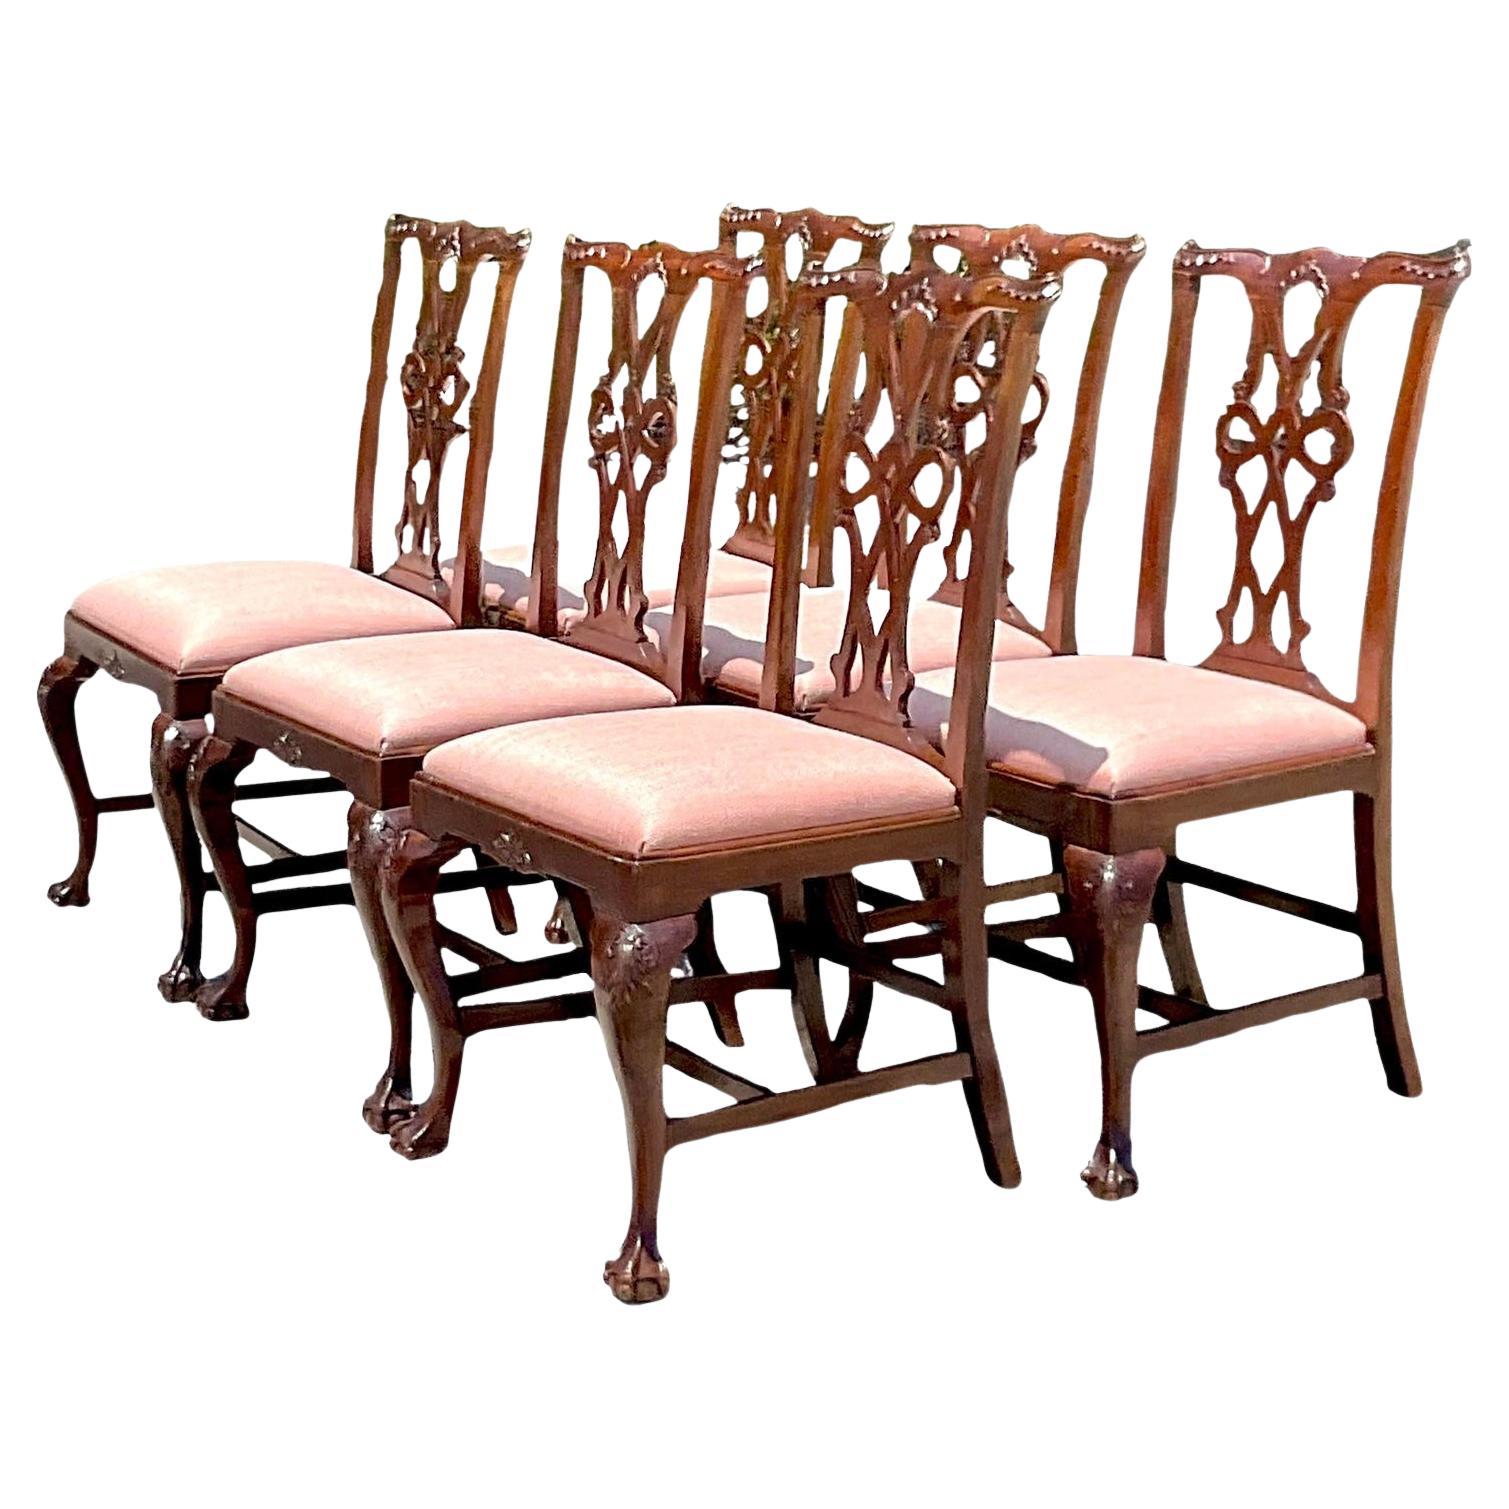 Vintage Regency Carved Ruffle Dining Chairs - Set of 6 For Sale